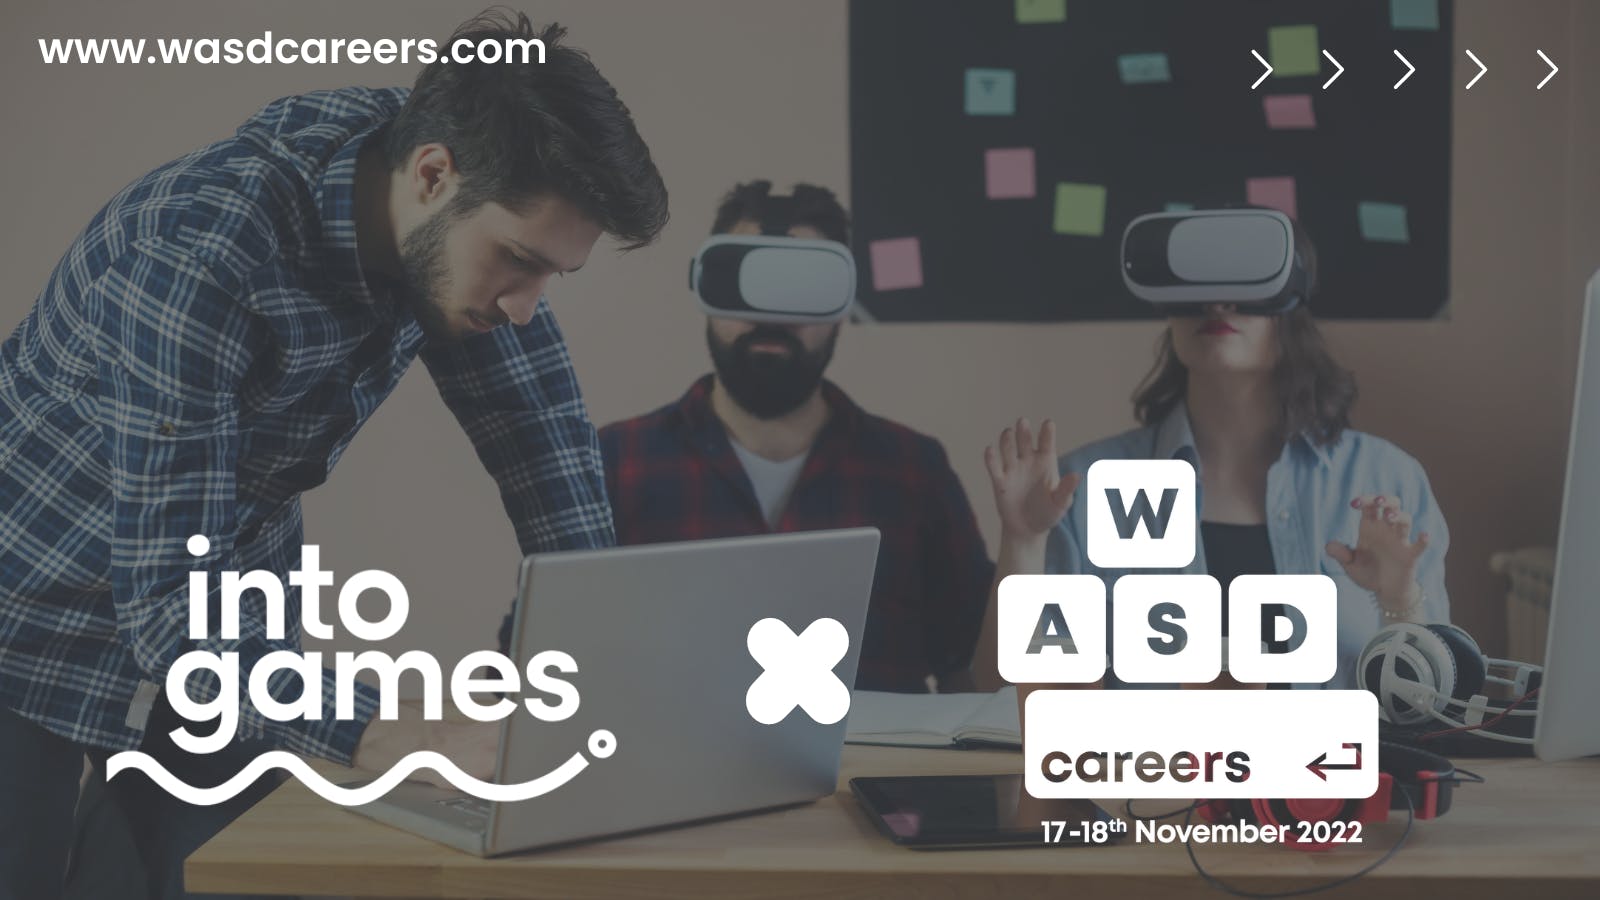 Into Games partnering with WASD Careers 